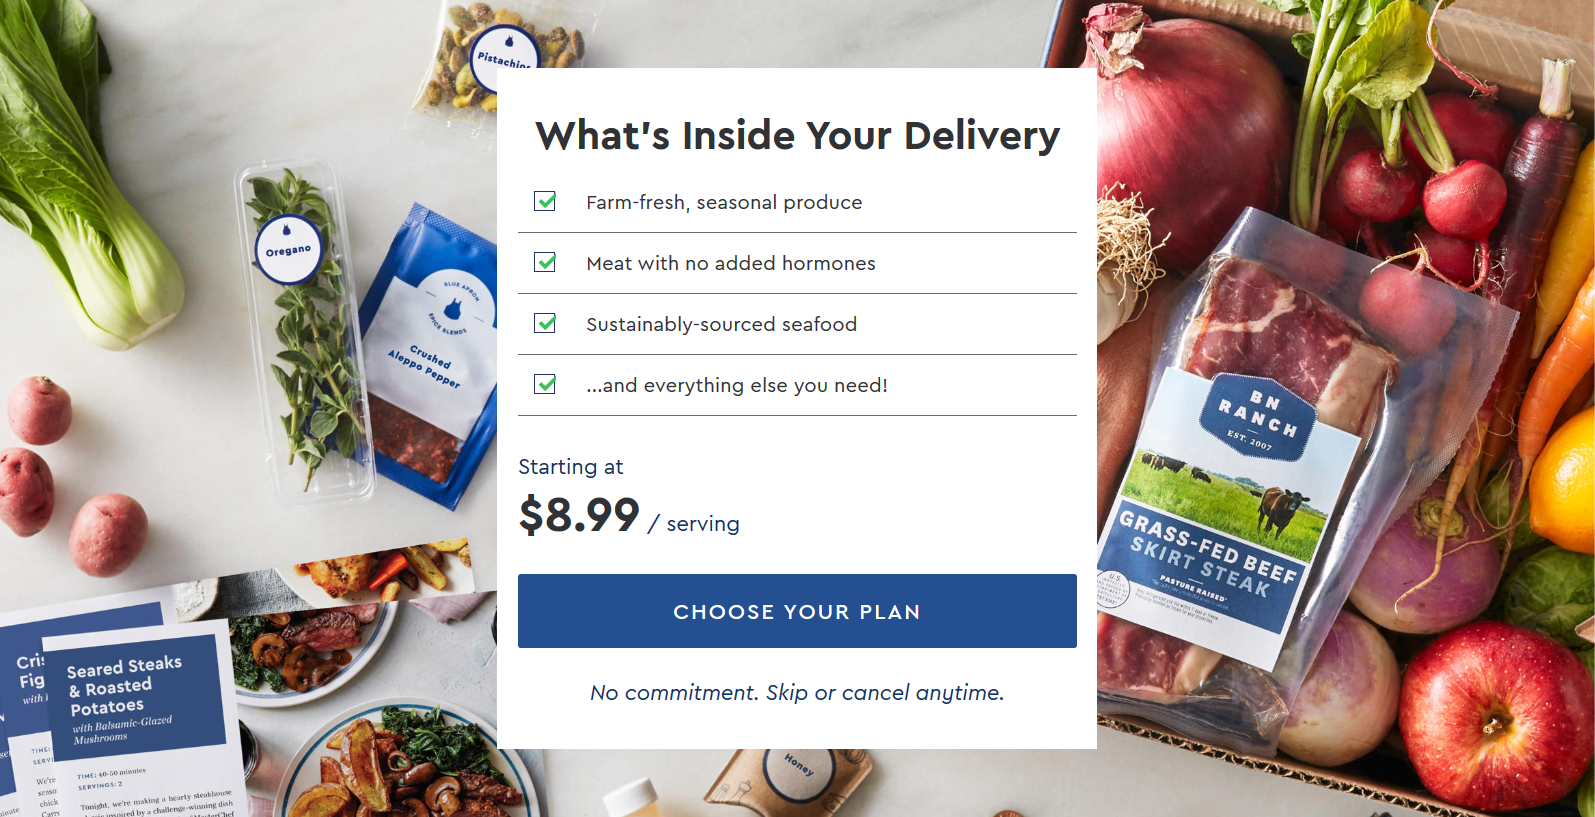 blue apron coupon for existing customer